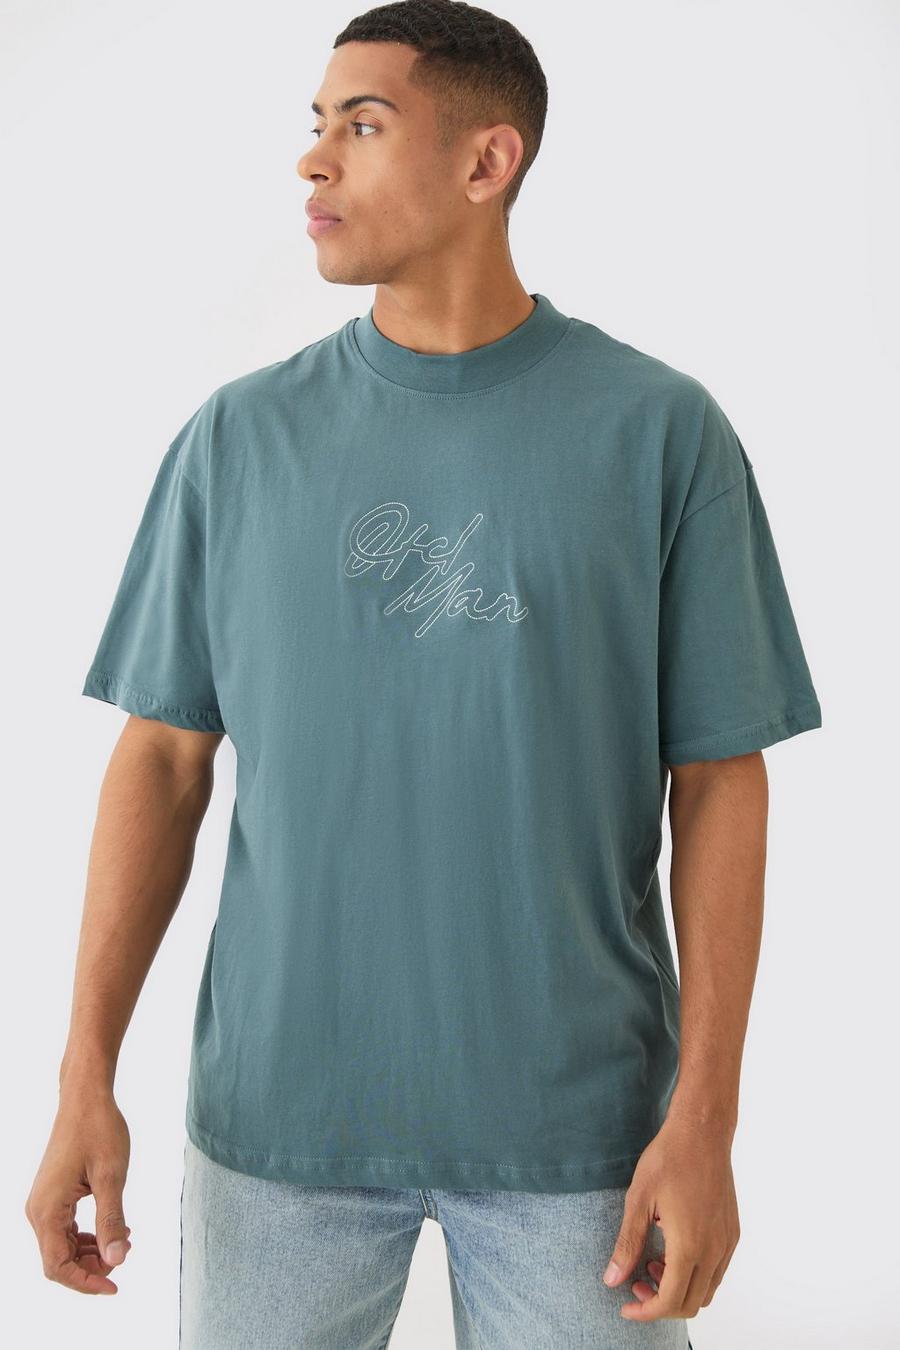 Slate blue Oversized Extended Neck Chain Stitch Embroidered Man T-shirt image number 1